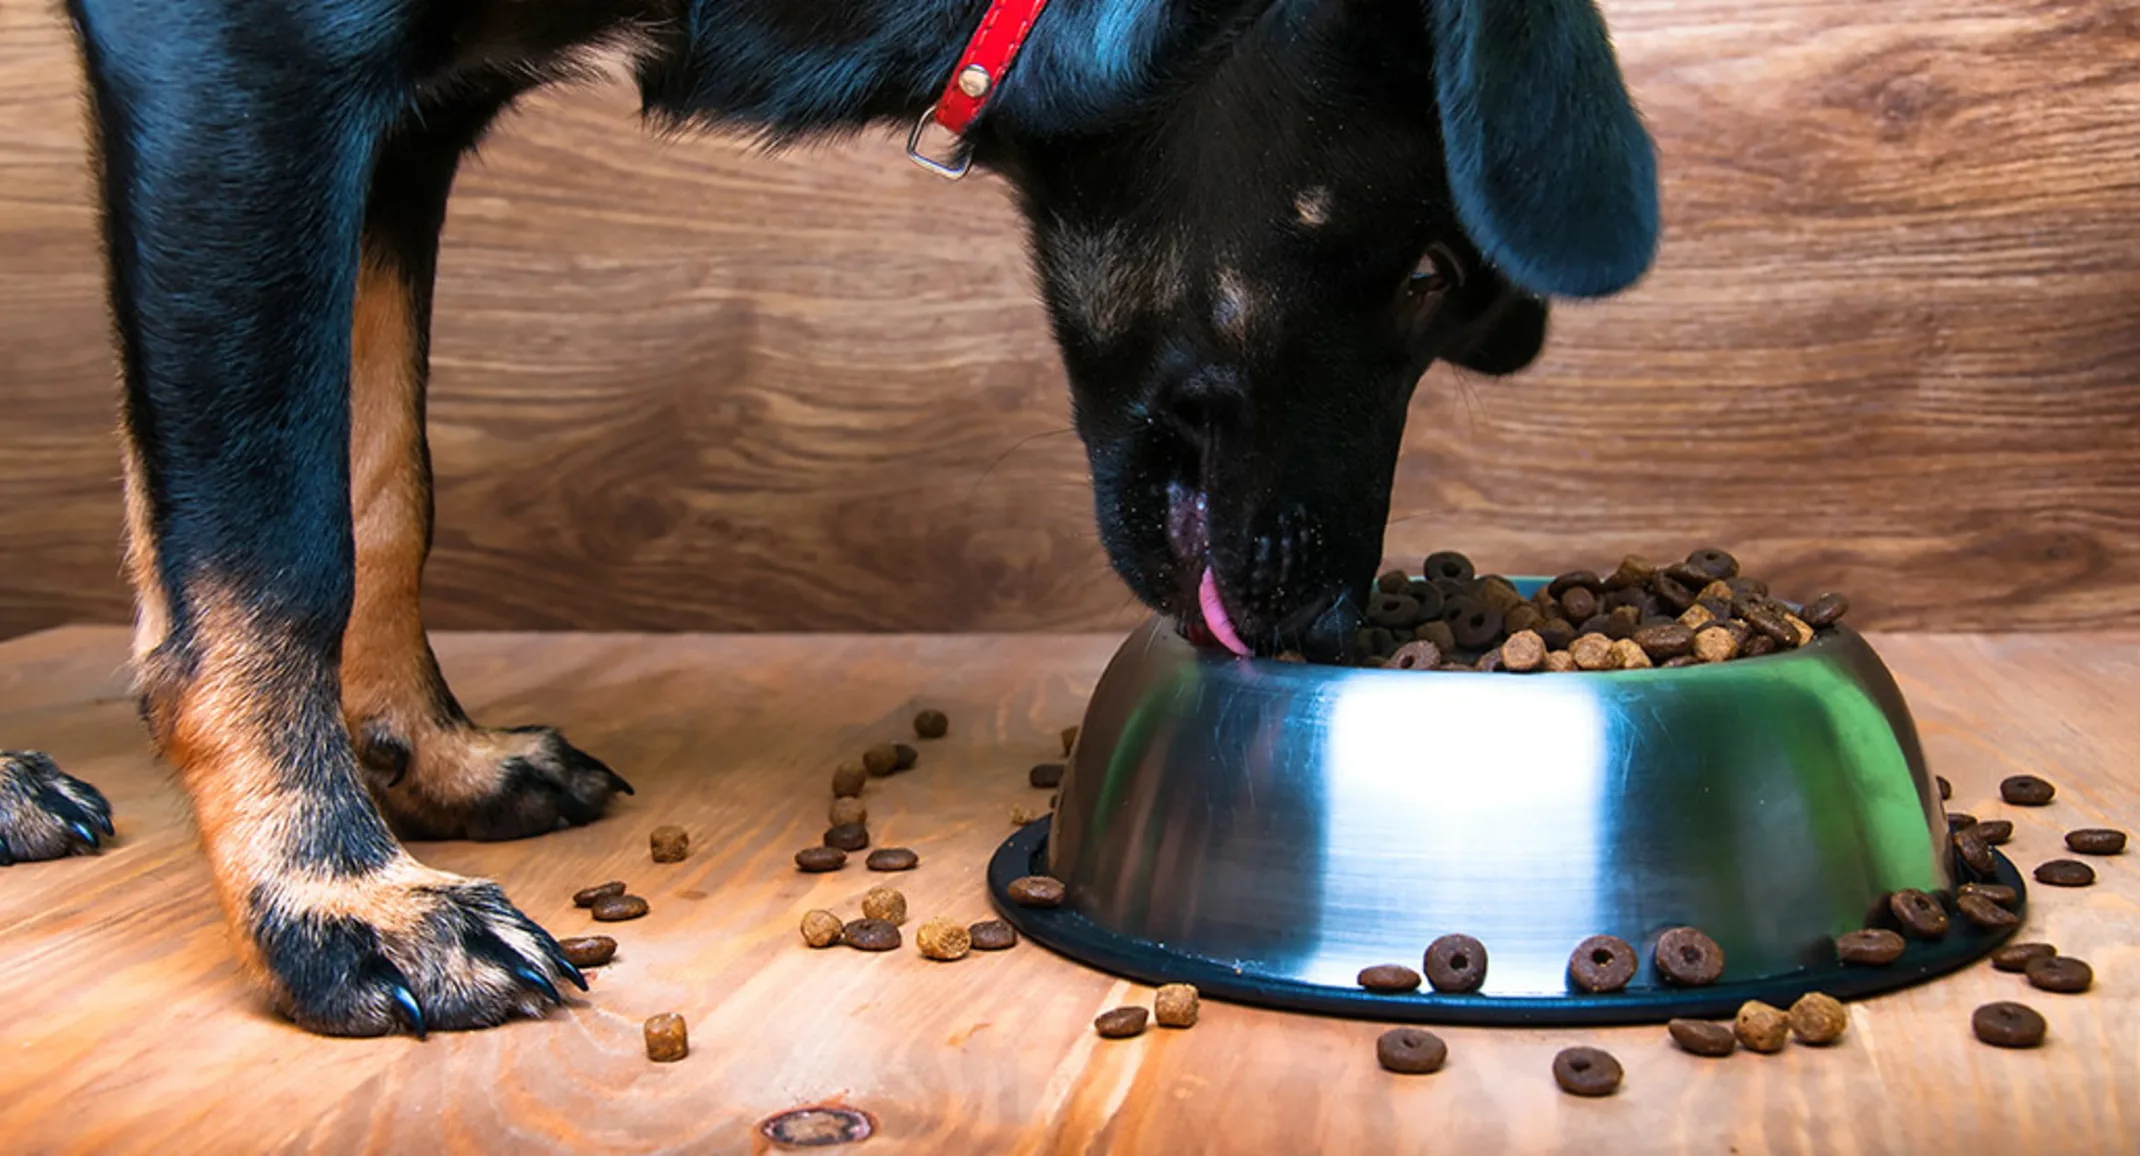 A large black dog eating from a bowl of food inside